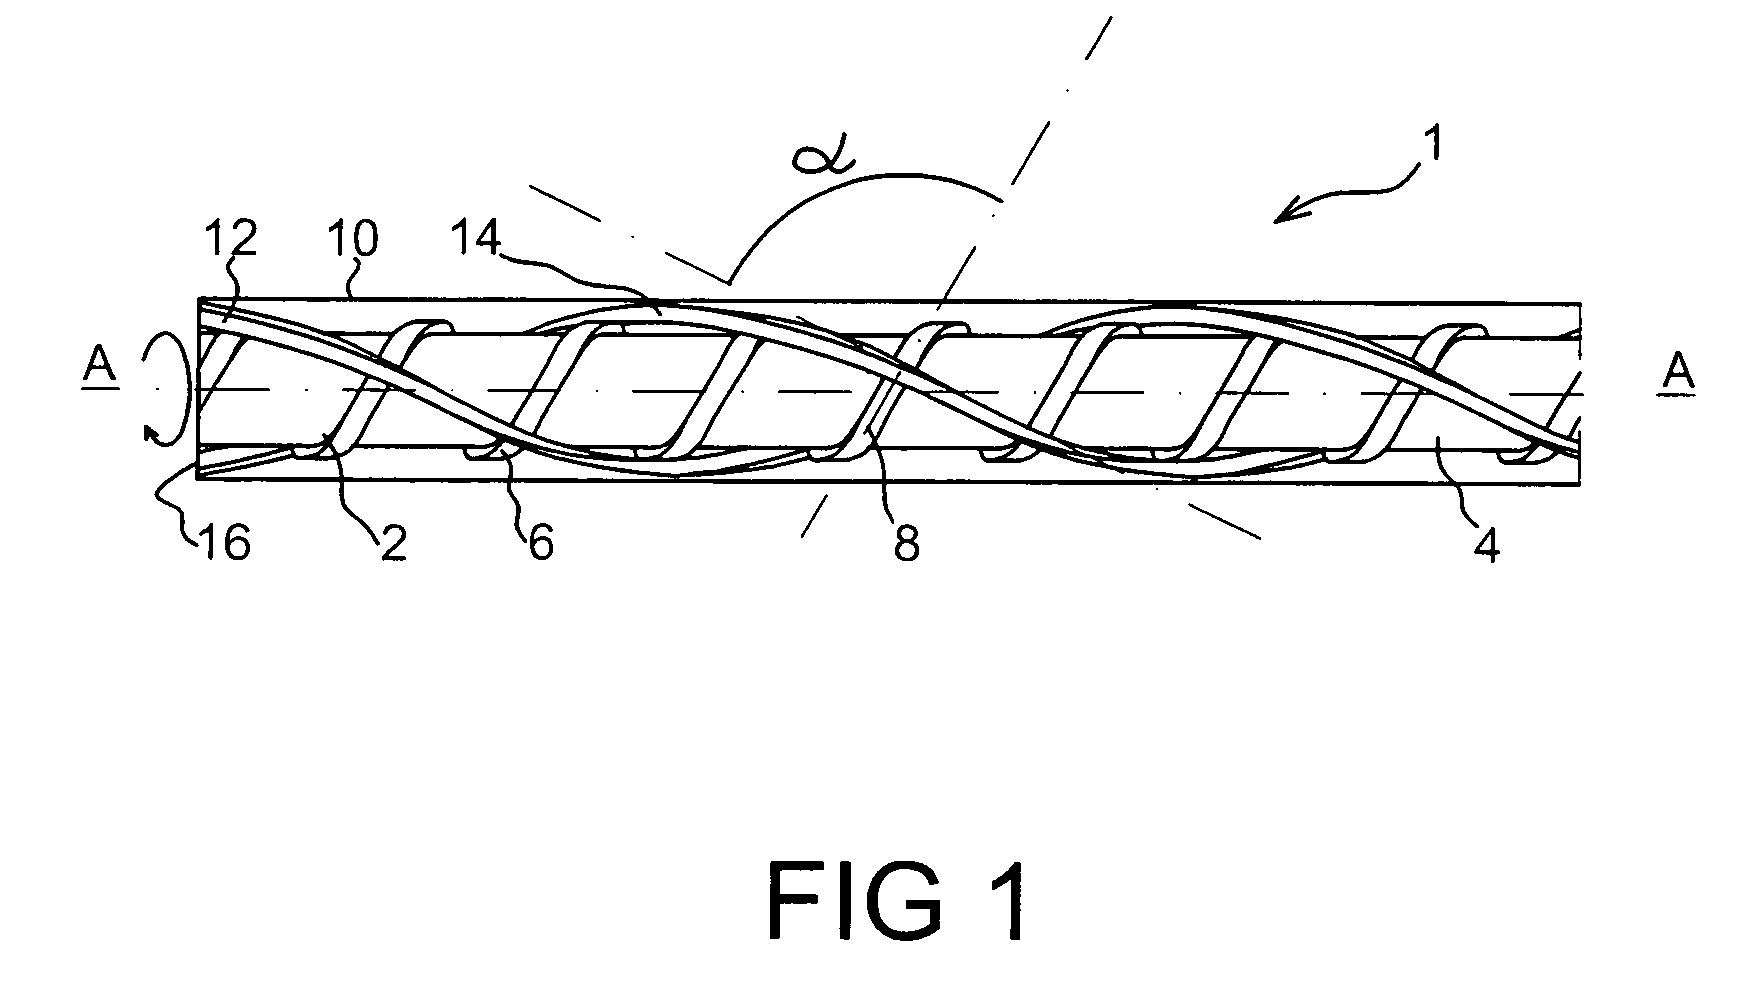 Feeding of a pressurised device with variable grain sizing solid